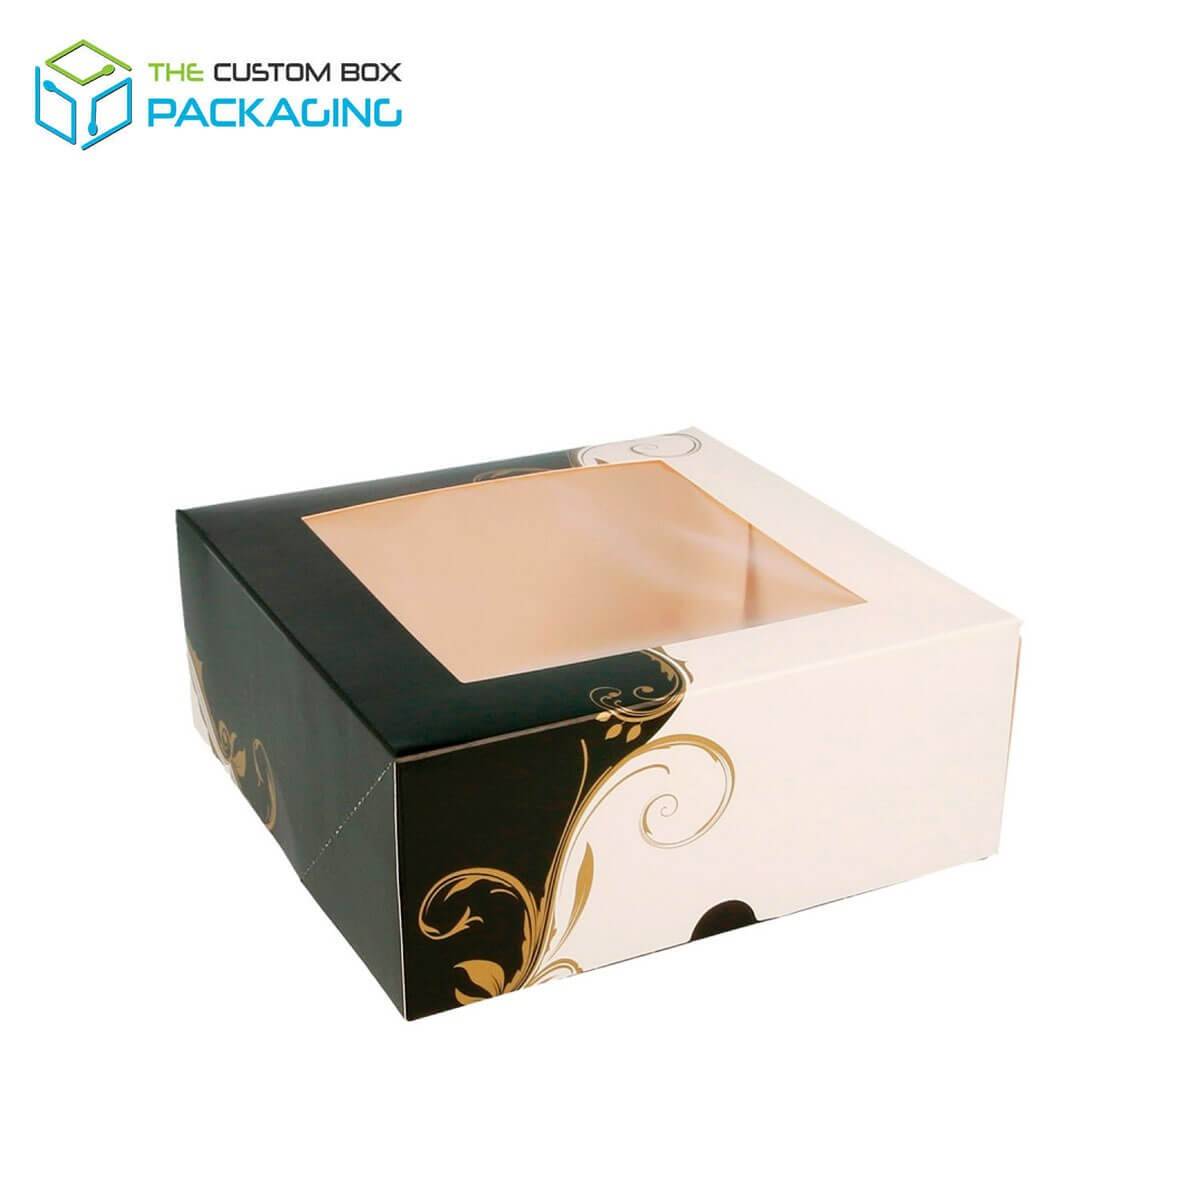 Why Bakeries Use Customized Boxes for Cake Packaging?